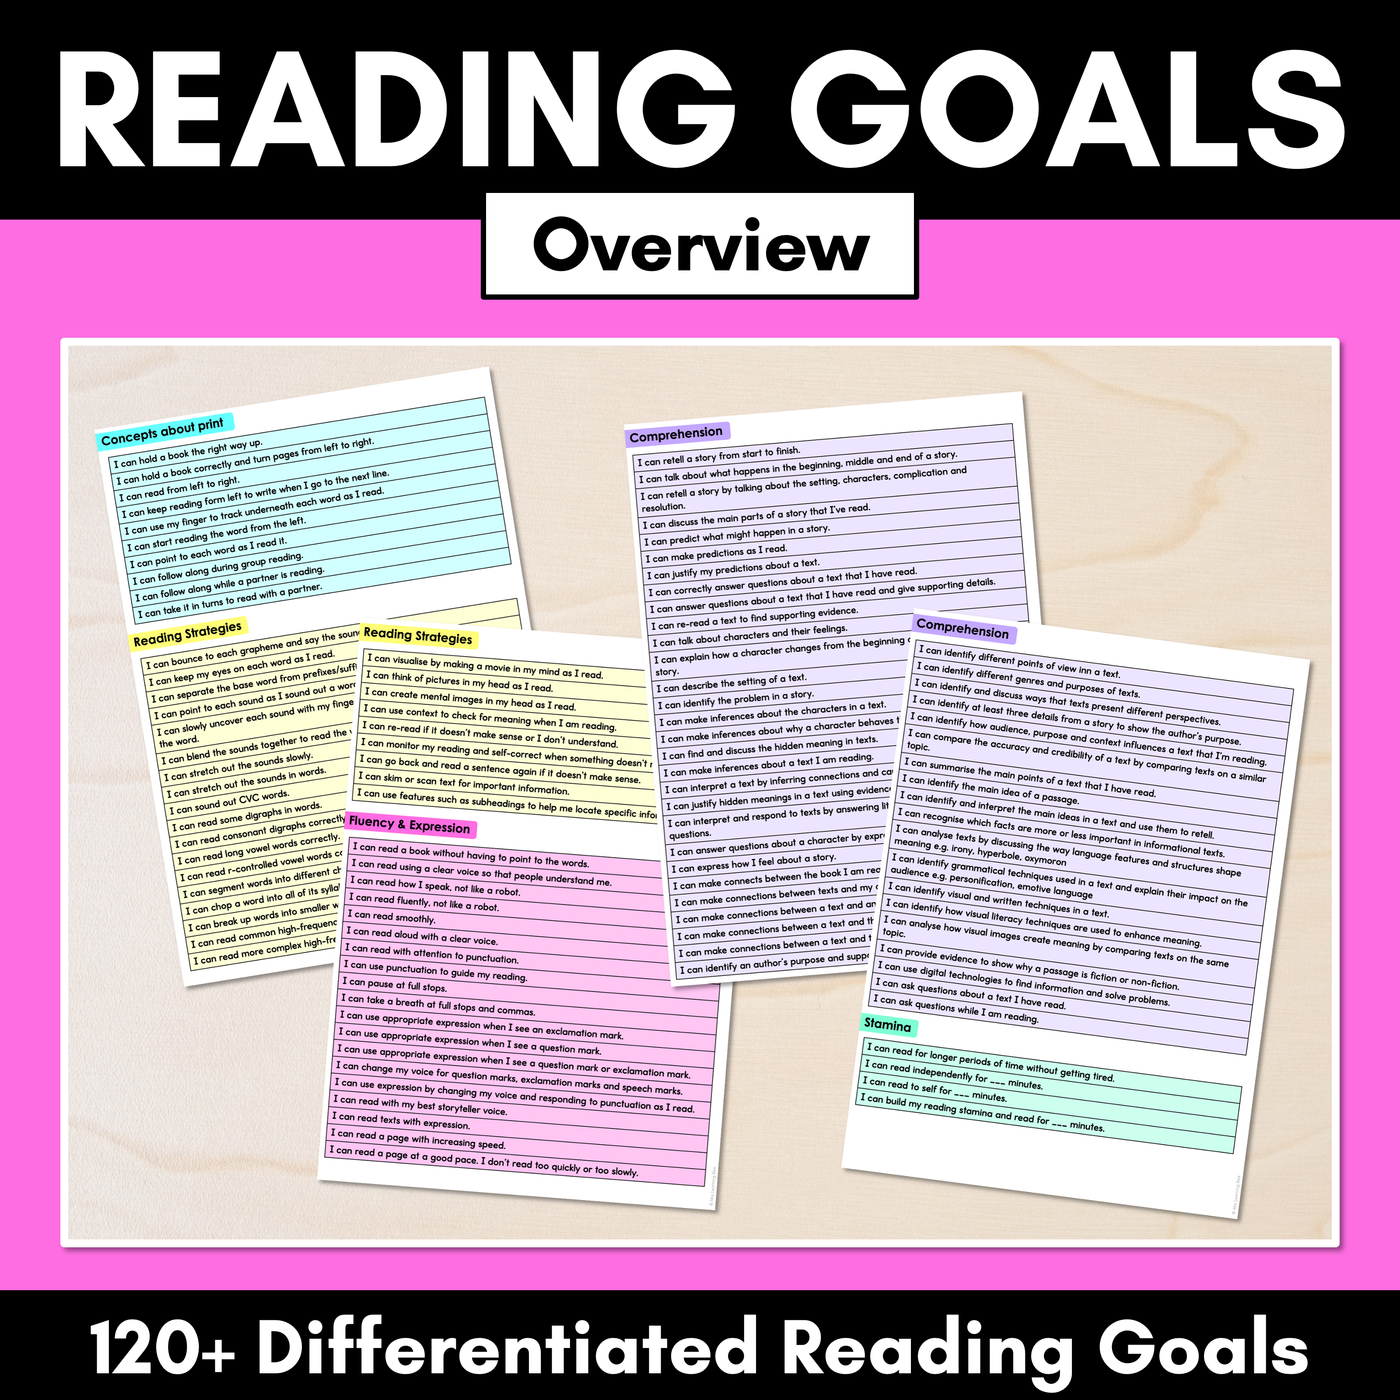 Reading Goals for Students - Editable list of learning goals for students